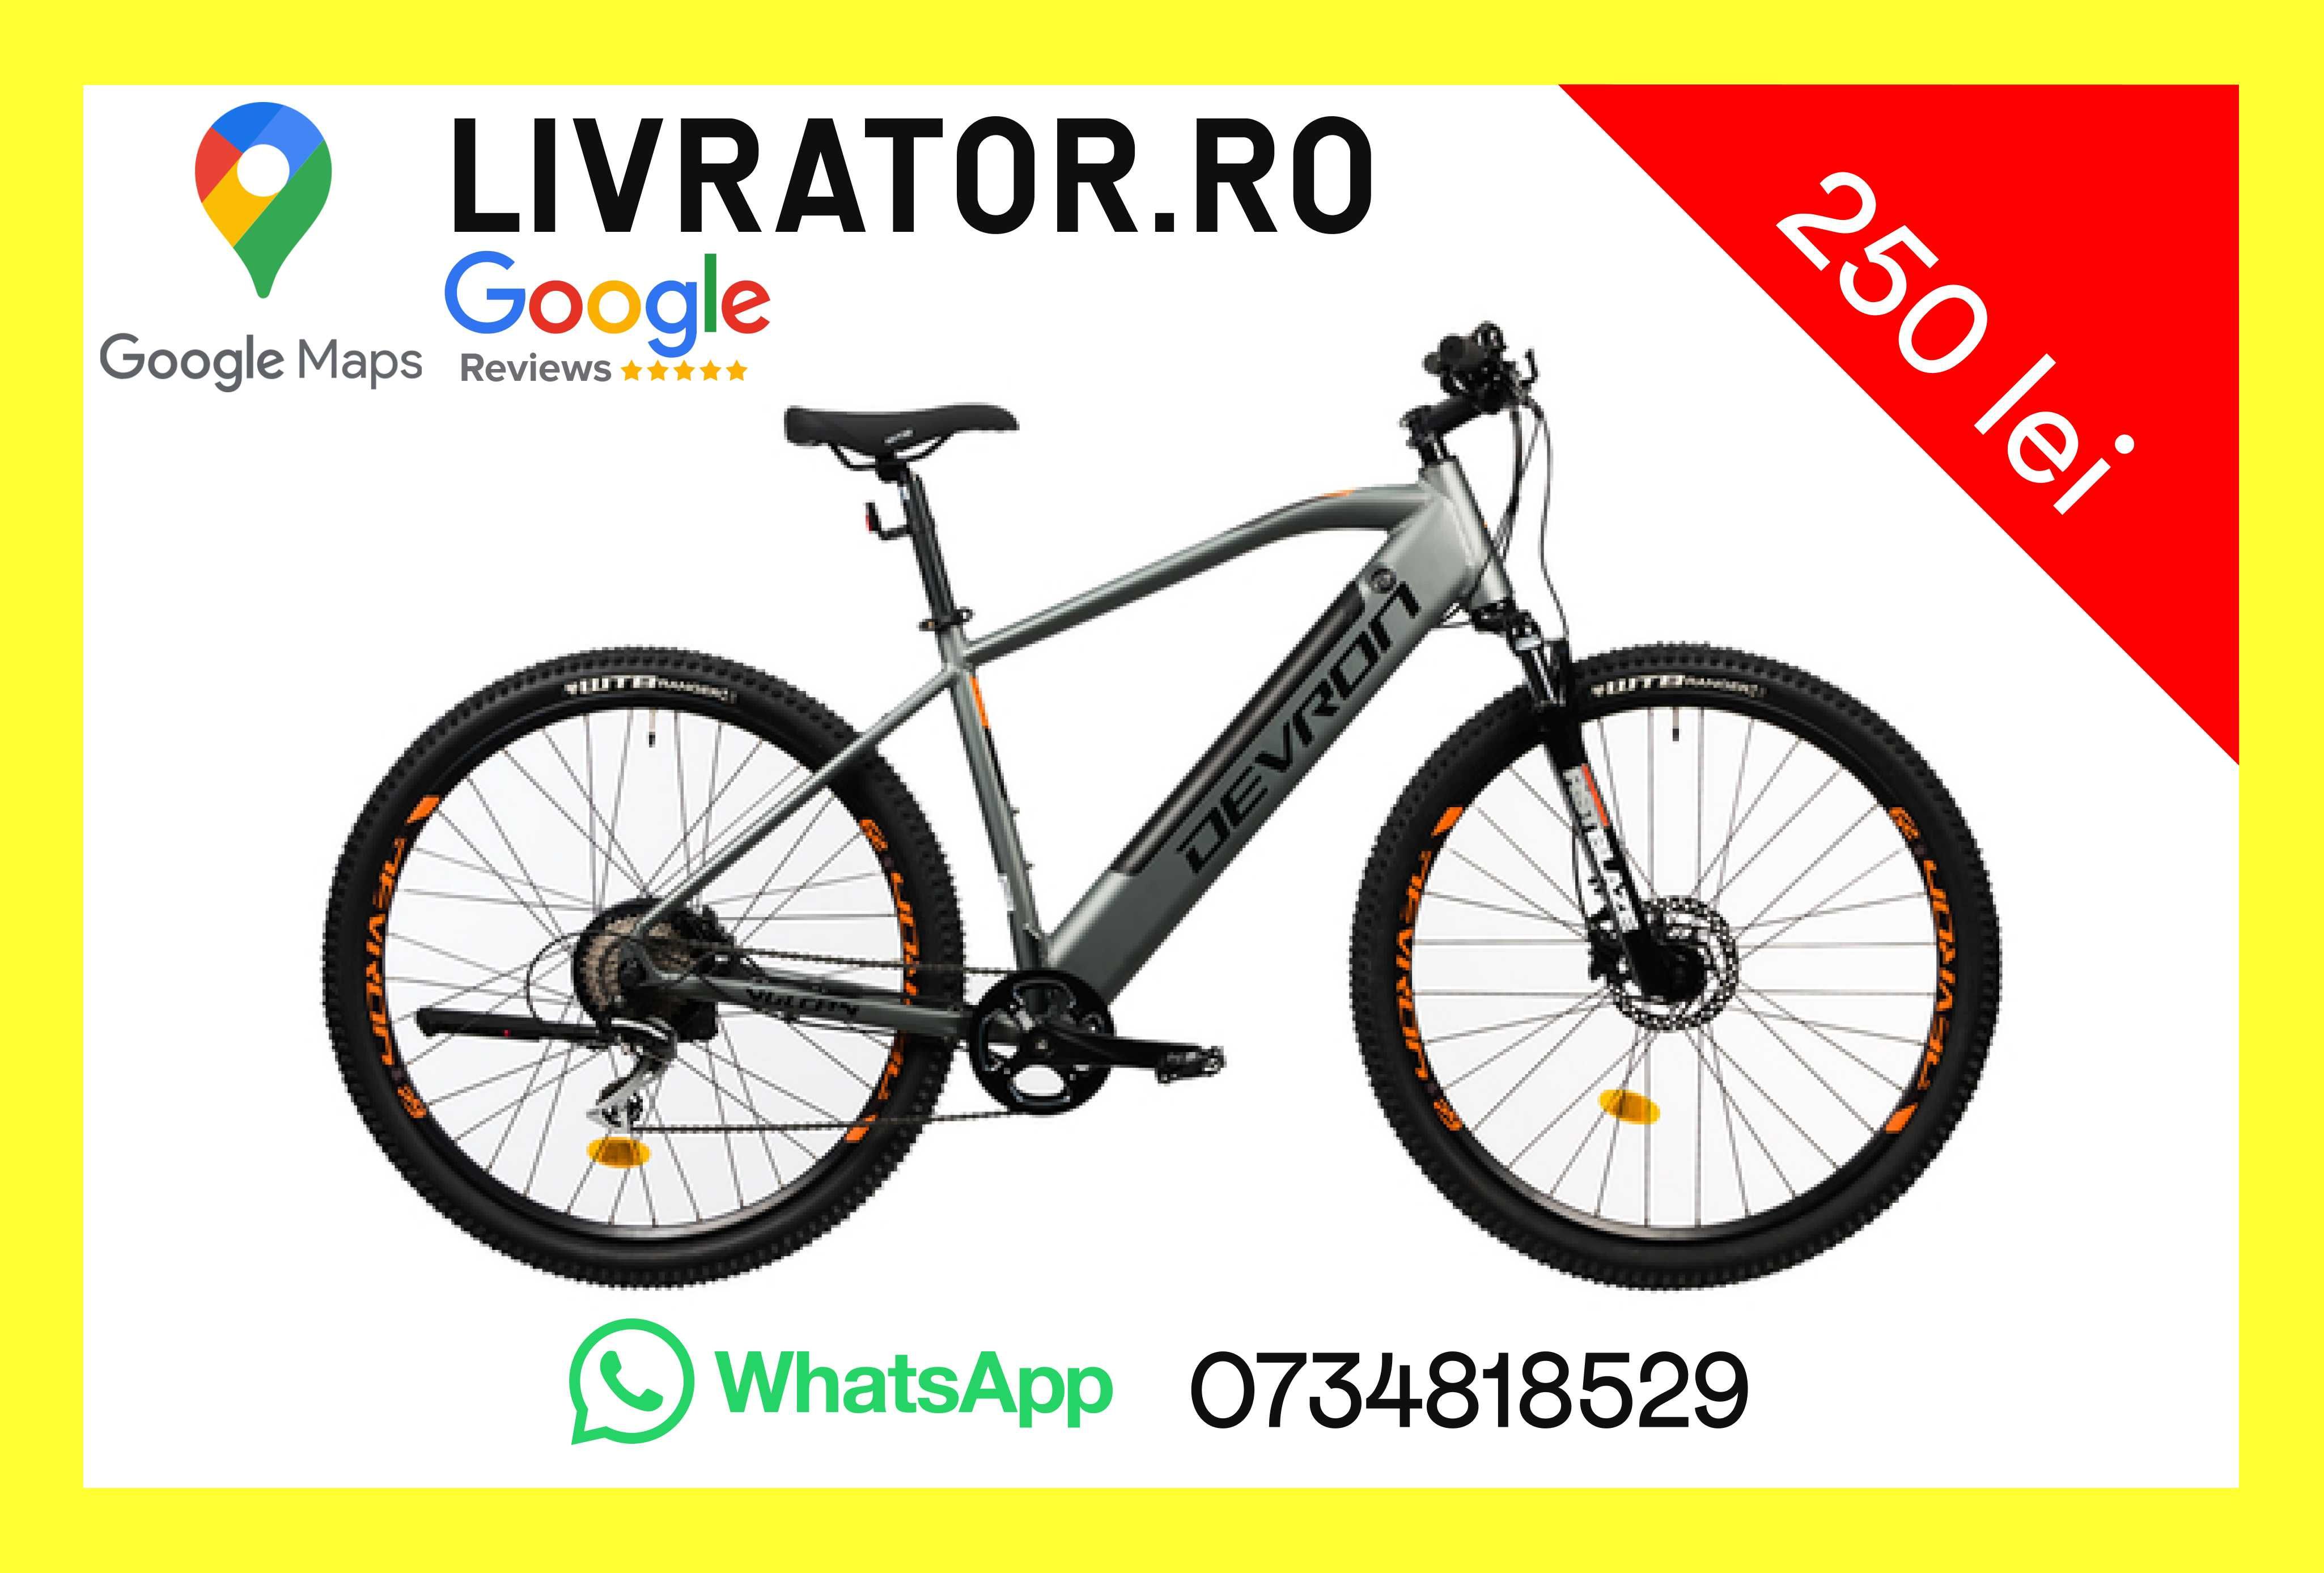 Rent AFISPORT Electric Bike Bicycle E-bike Delivery at Glovo Tazz Bolt